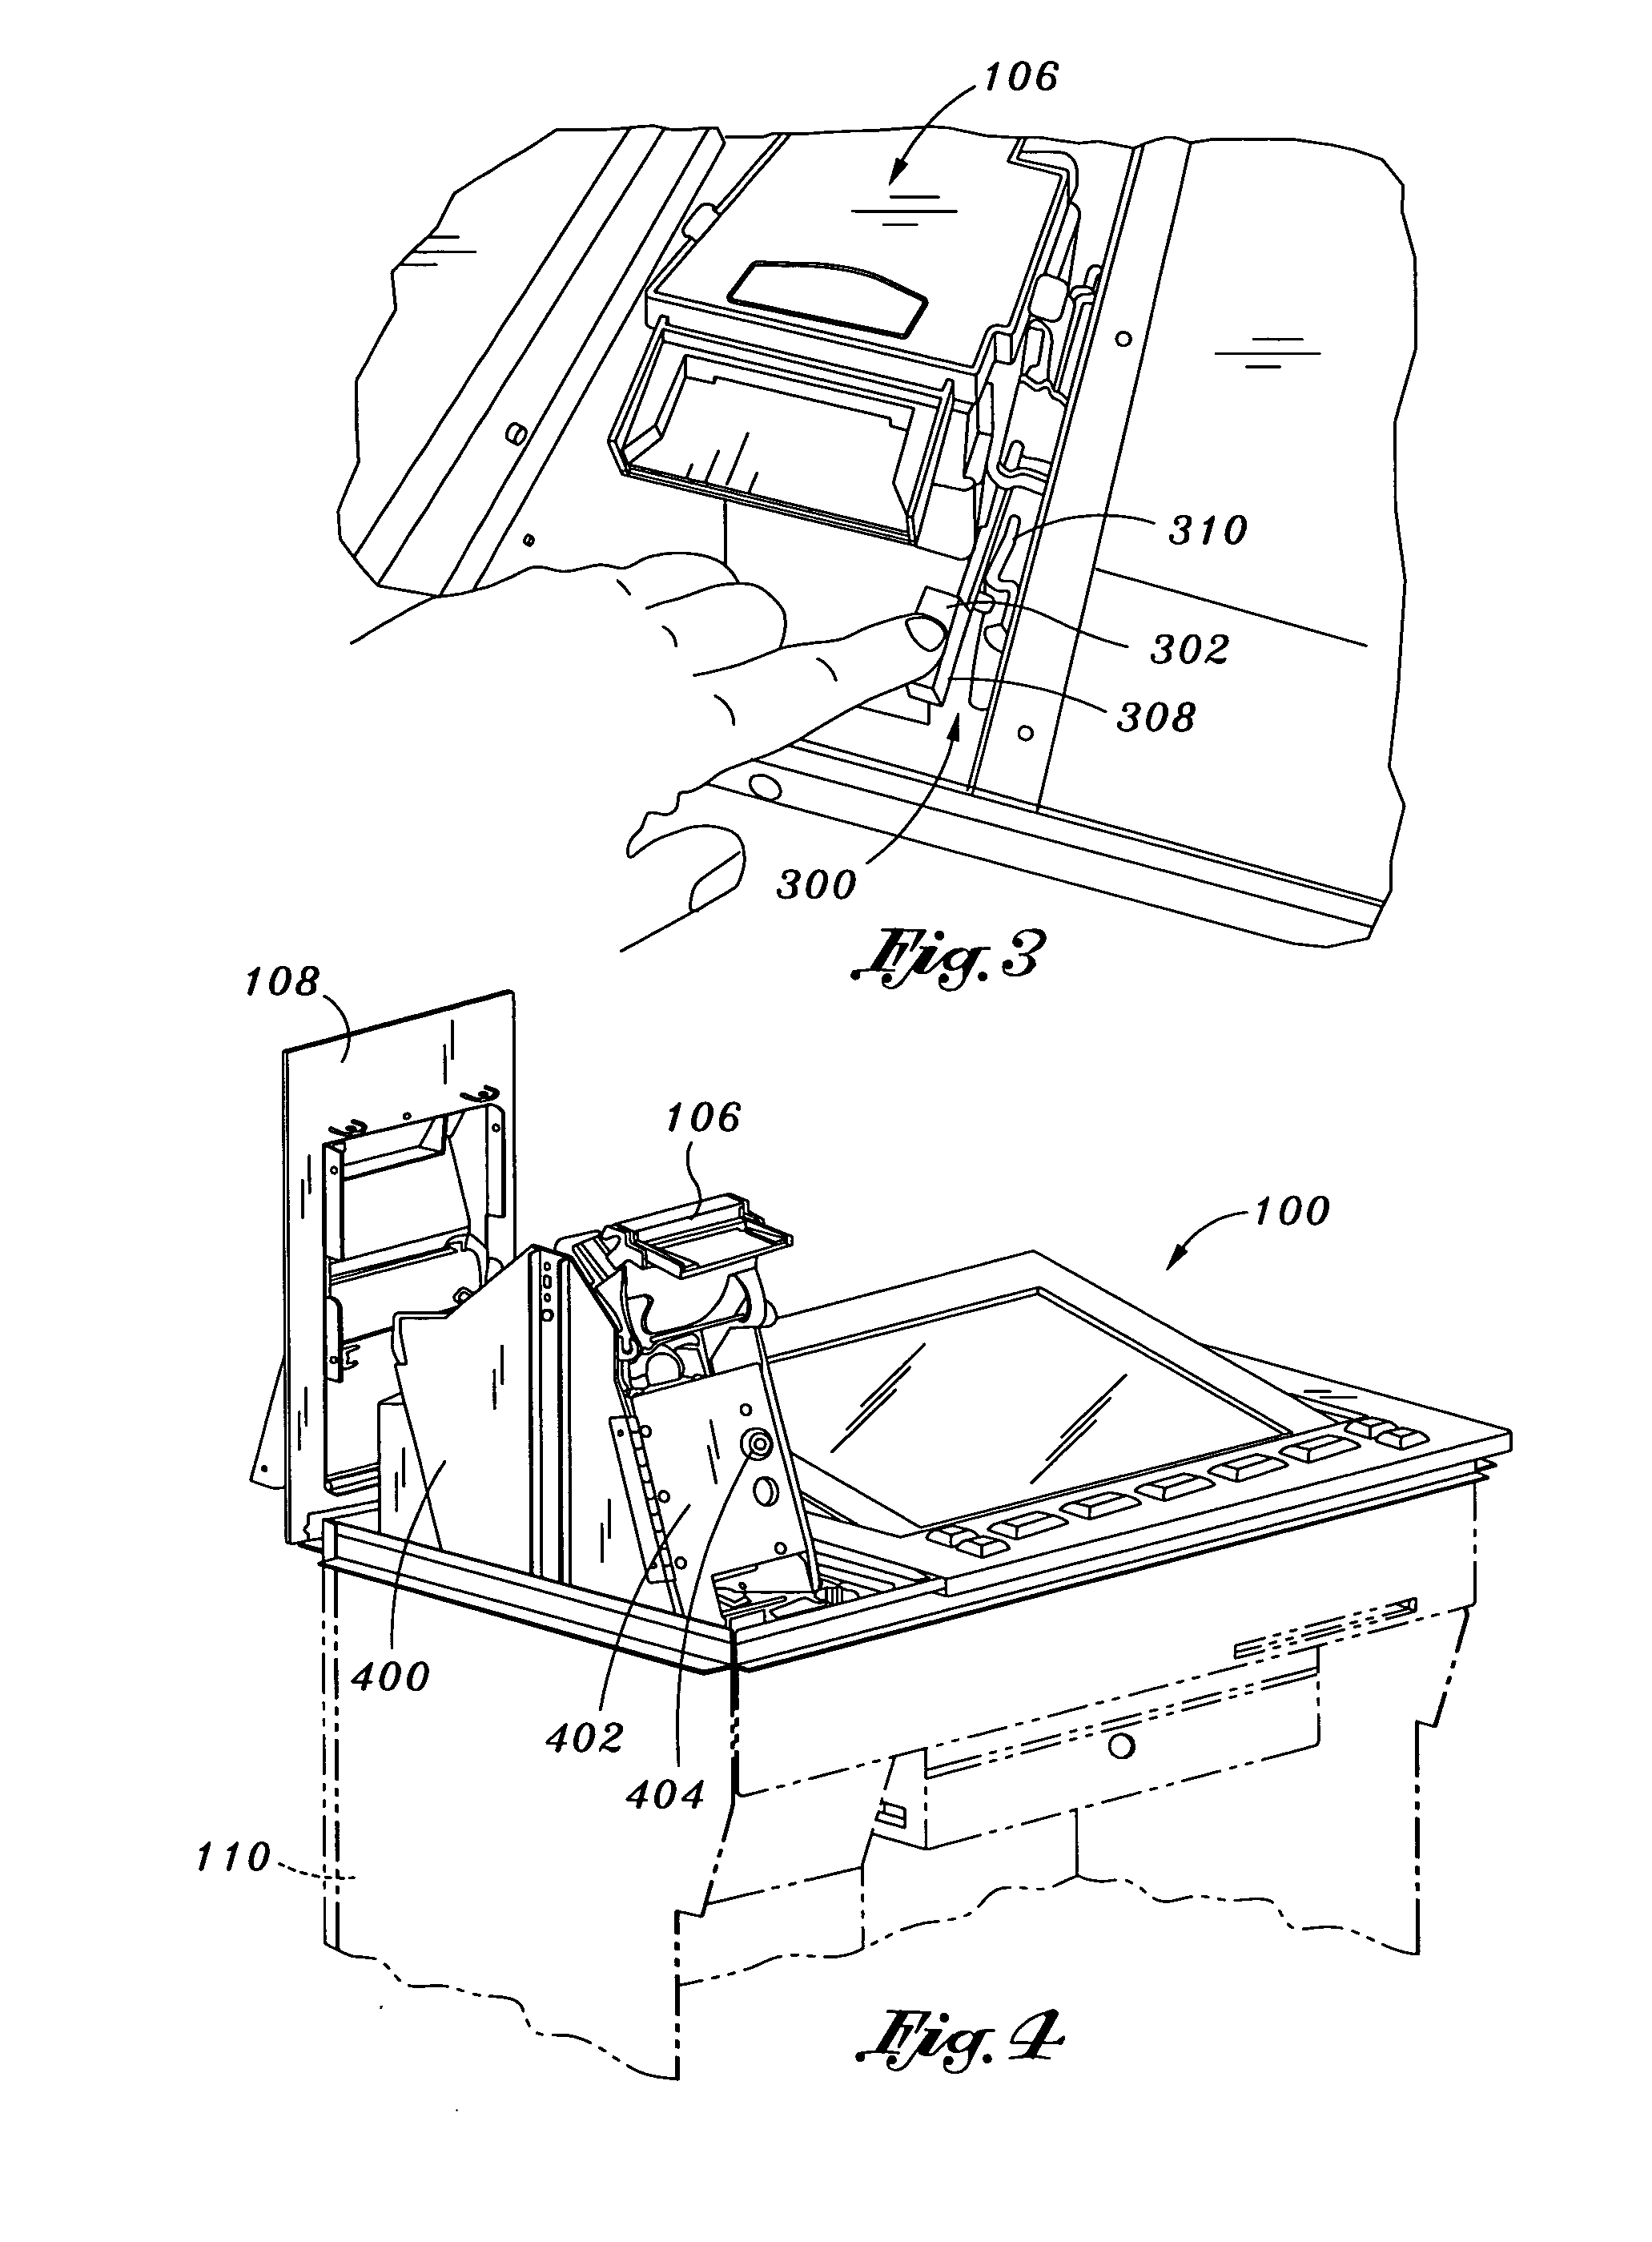 Gaming device with a vertically translating currency acceptor